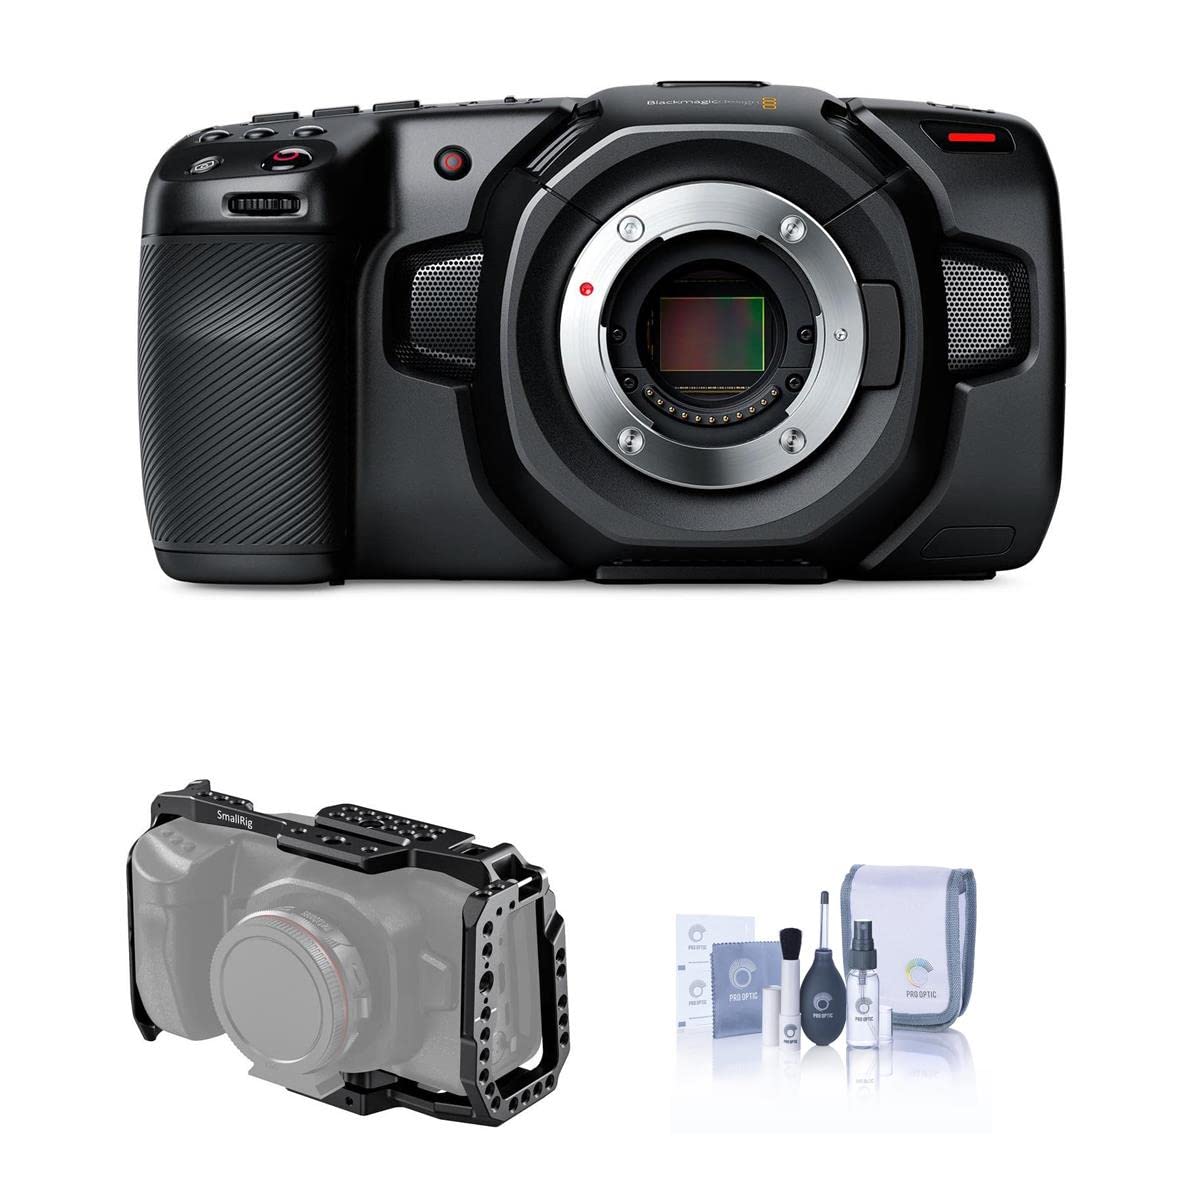 Blackmagic Design Pocket Cinema Camera 4K, Bundled with, SmallRig Full Cage for Black Magic Pocket Camera, and Care and Cleaning Kit for Professional Digital Video Recording